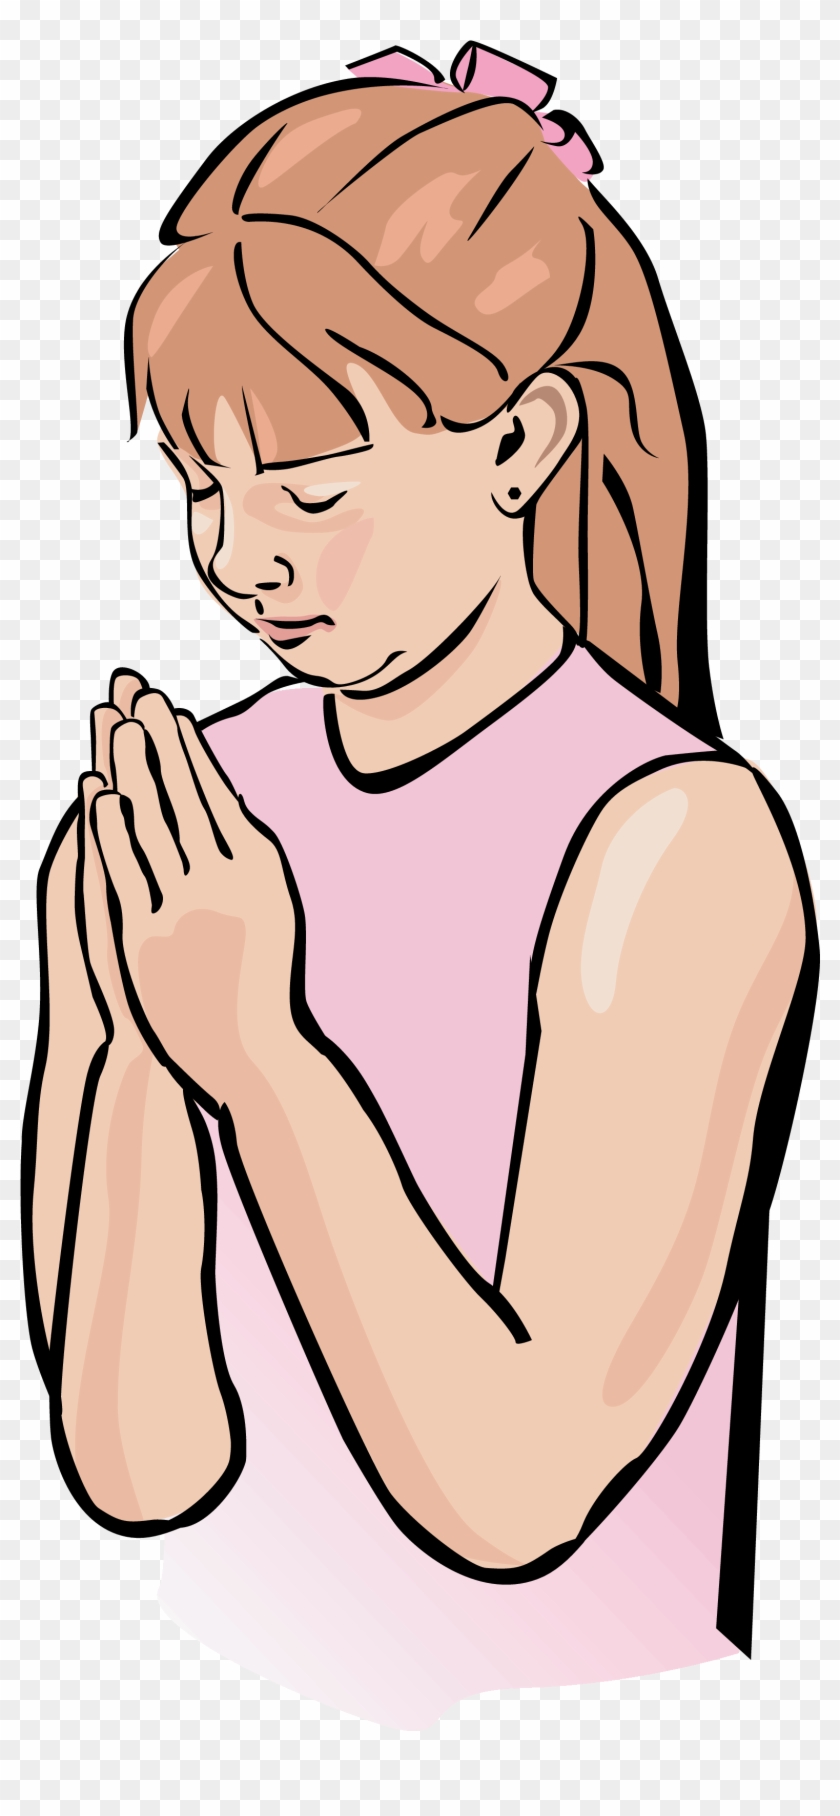 Child Prayer Clipart Free Clipart Images - Psychic #1132091